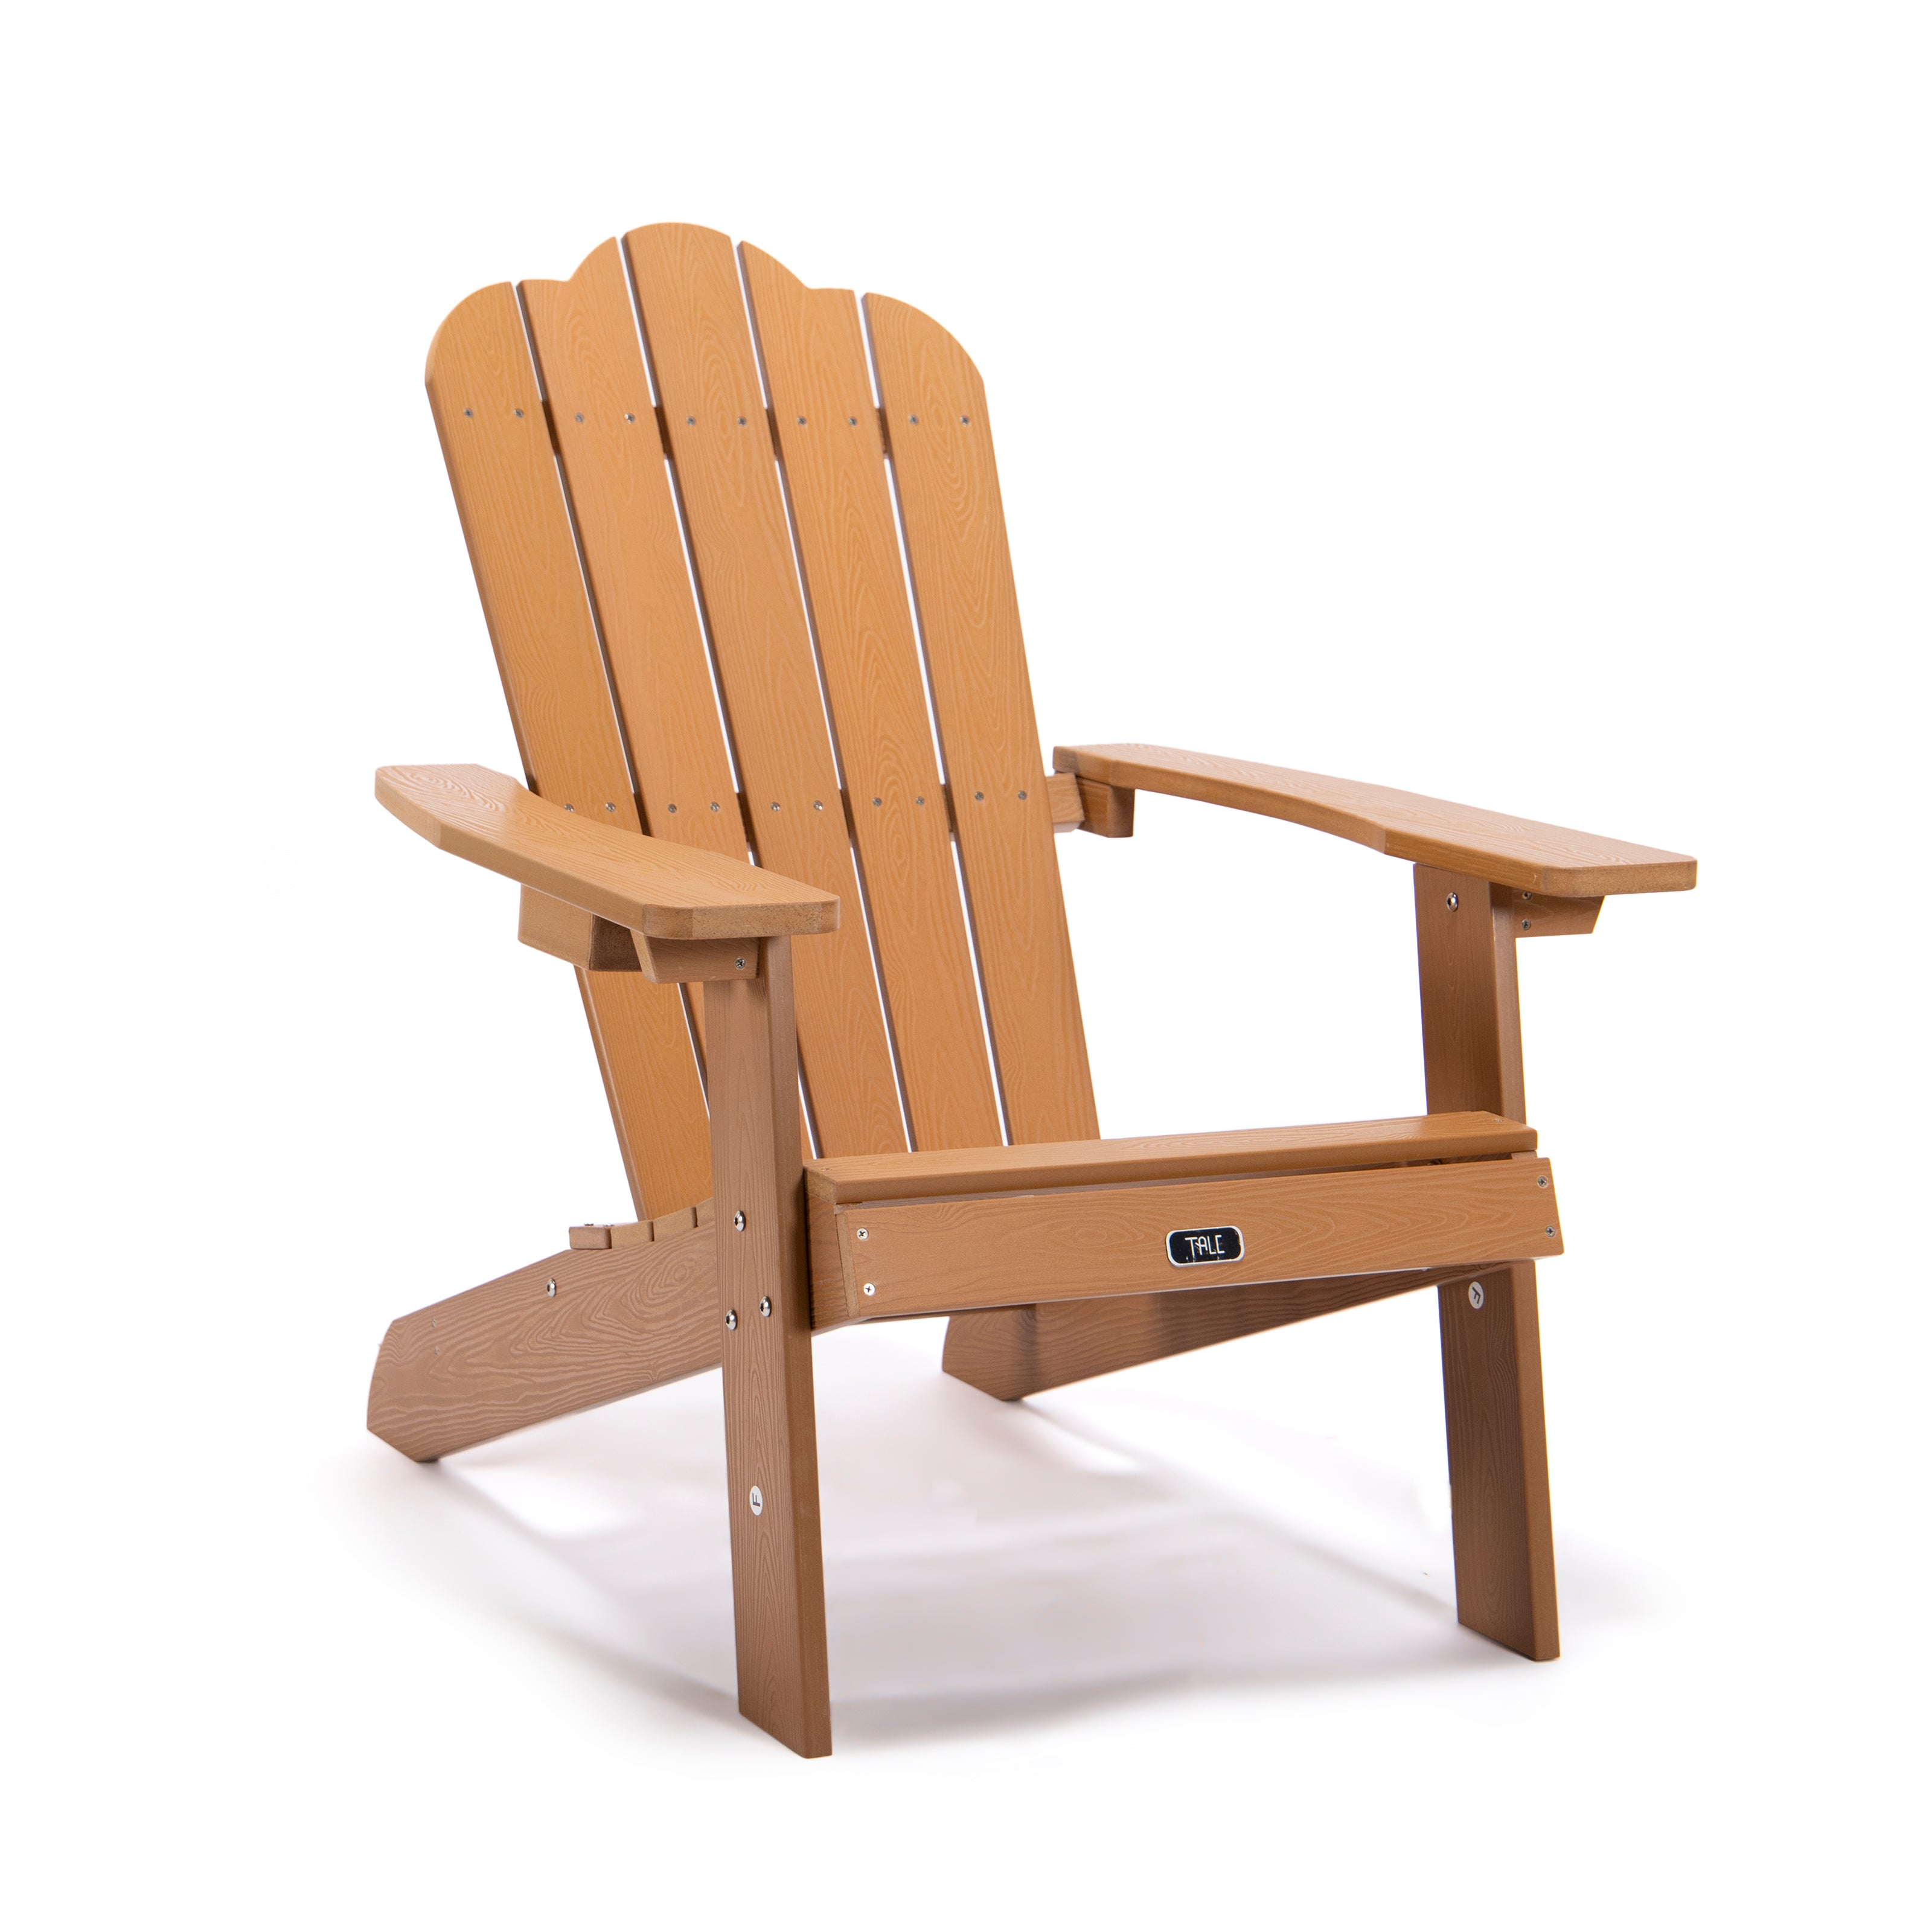 TALE Adirondack Backyard Outdoor Chair US ONLY